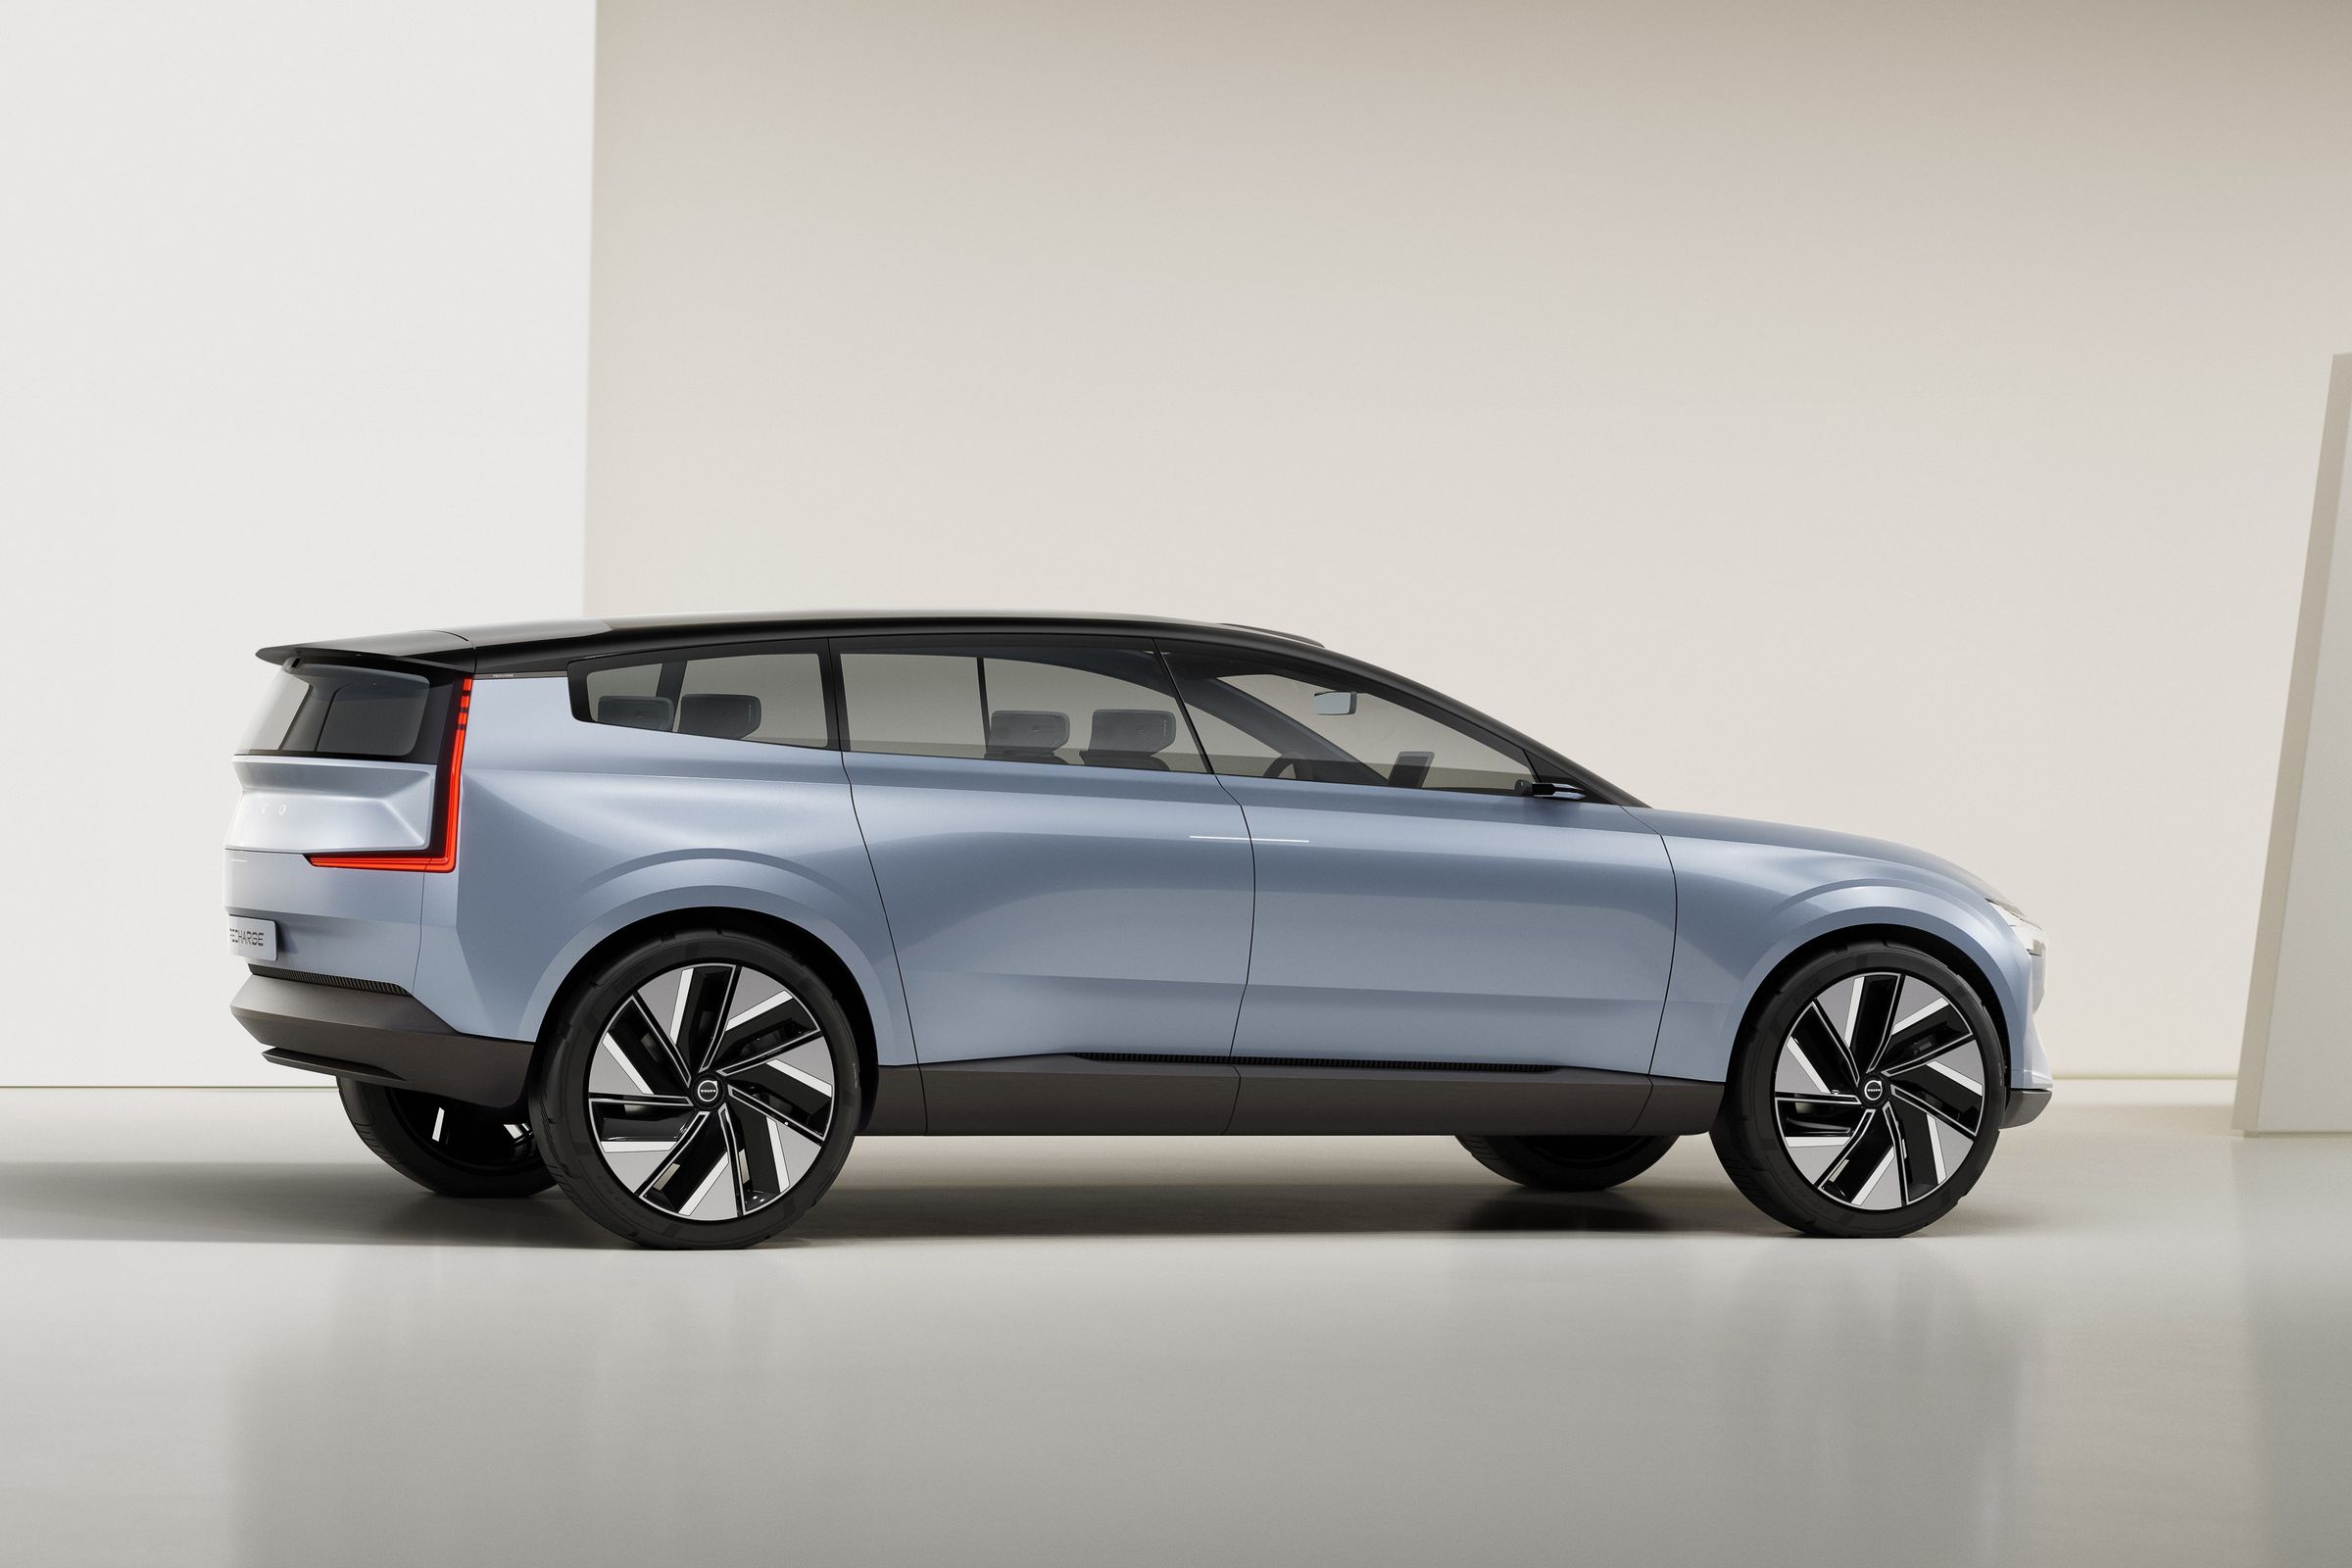 Volvo’s Concept Recharge electric concept vehicle on a white background